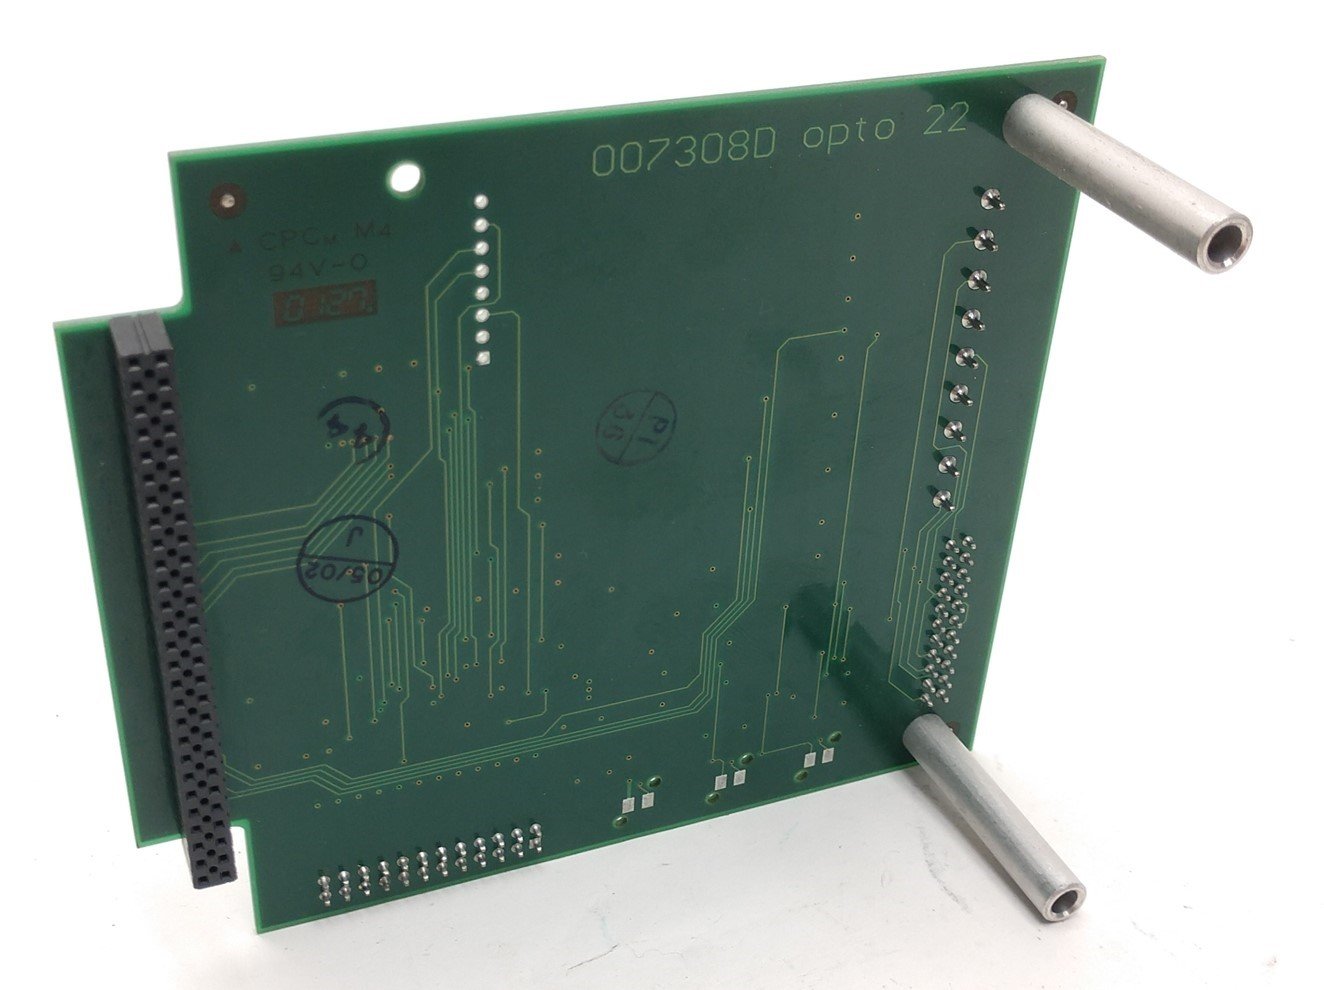 Used OPTO 22 B1 16-Channel Optomux Interface Brain Board for Serial Networks 007308D